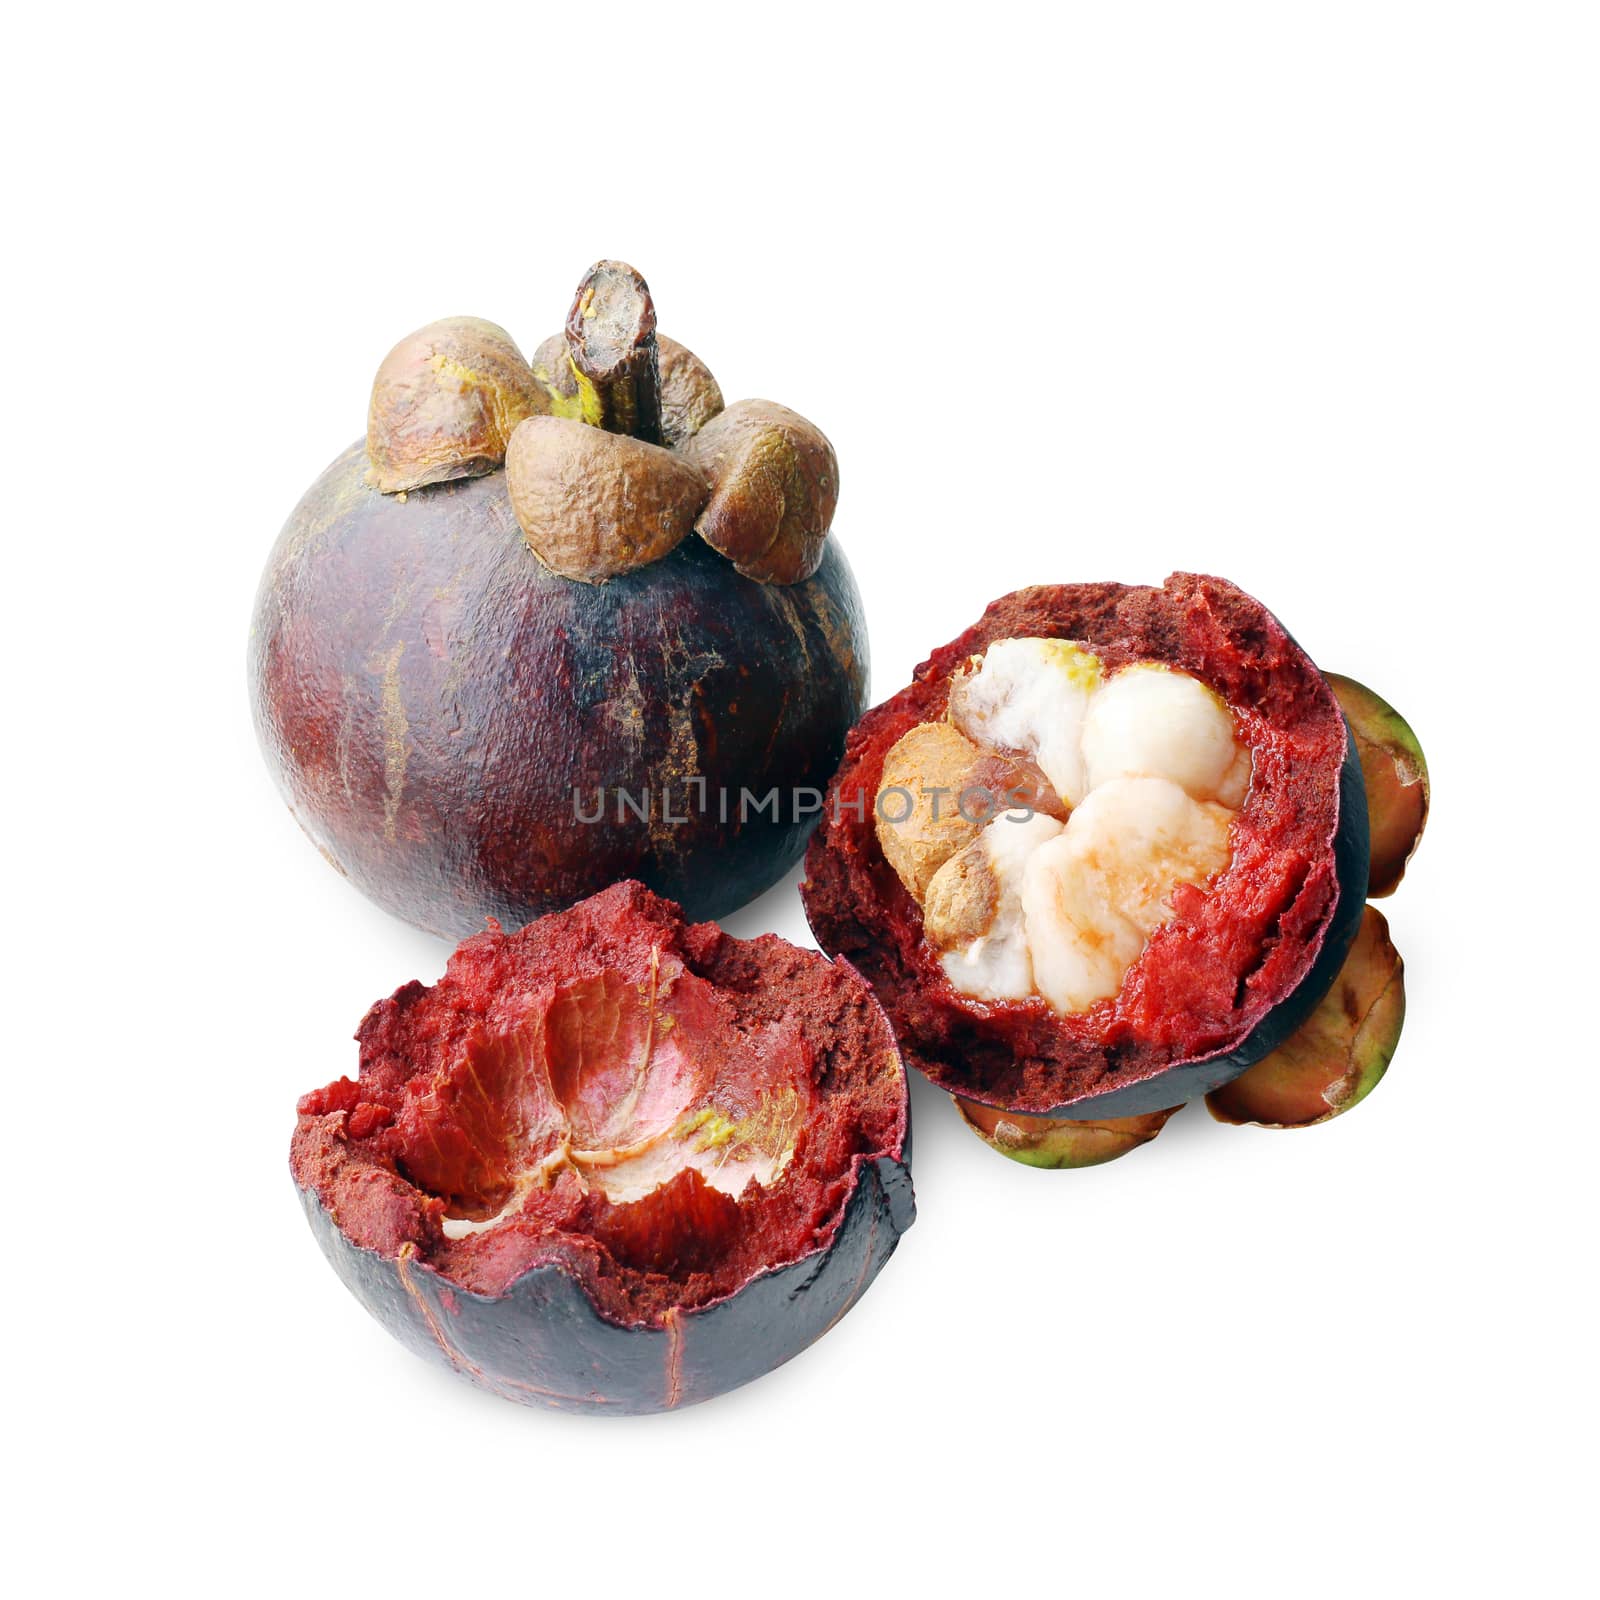 mangosteen fruit rotten close up, mangosteen rot and cut peel half on white background, ripe mangosteen fruit, waste from rot of mangosteen fruit